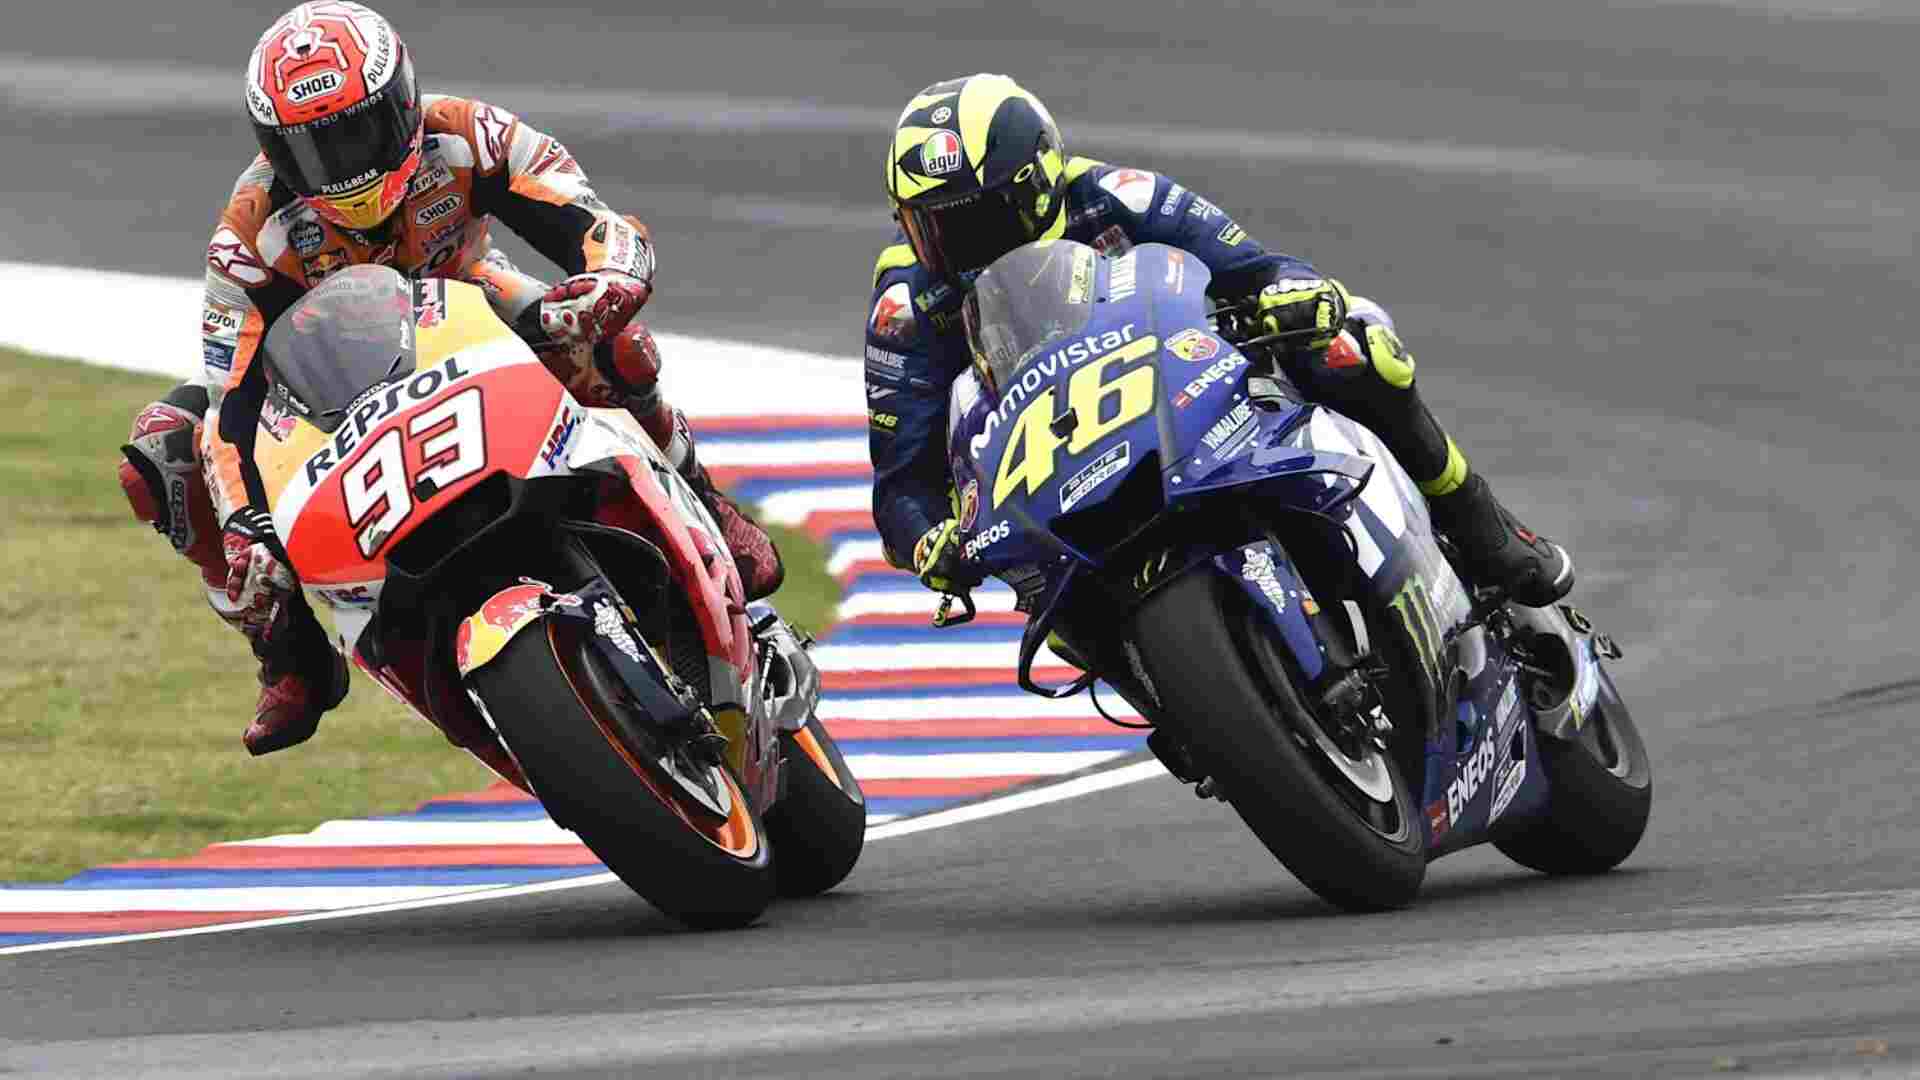 UP To Host MotoGP Until 2029; To Pay Rs 80 Crore Licence Fee To Dorna